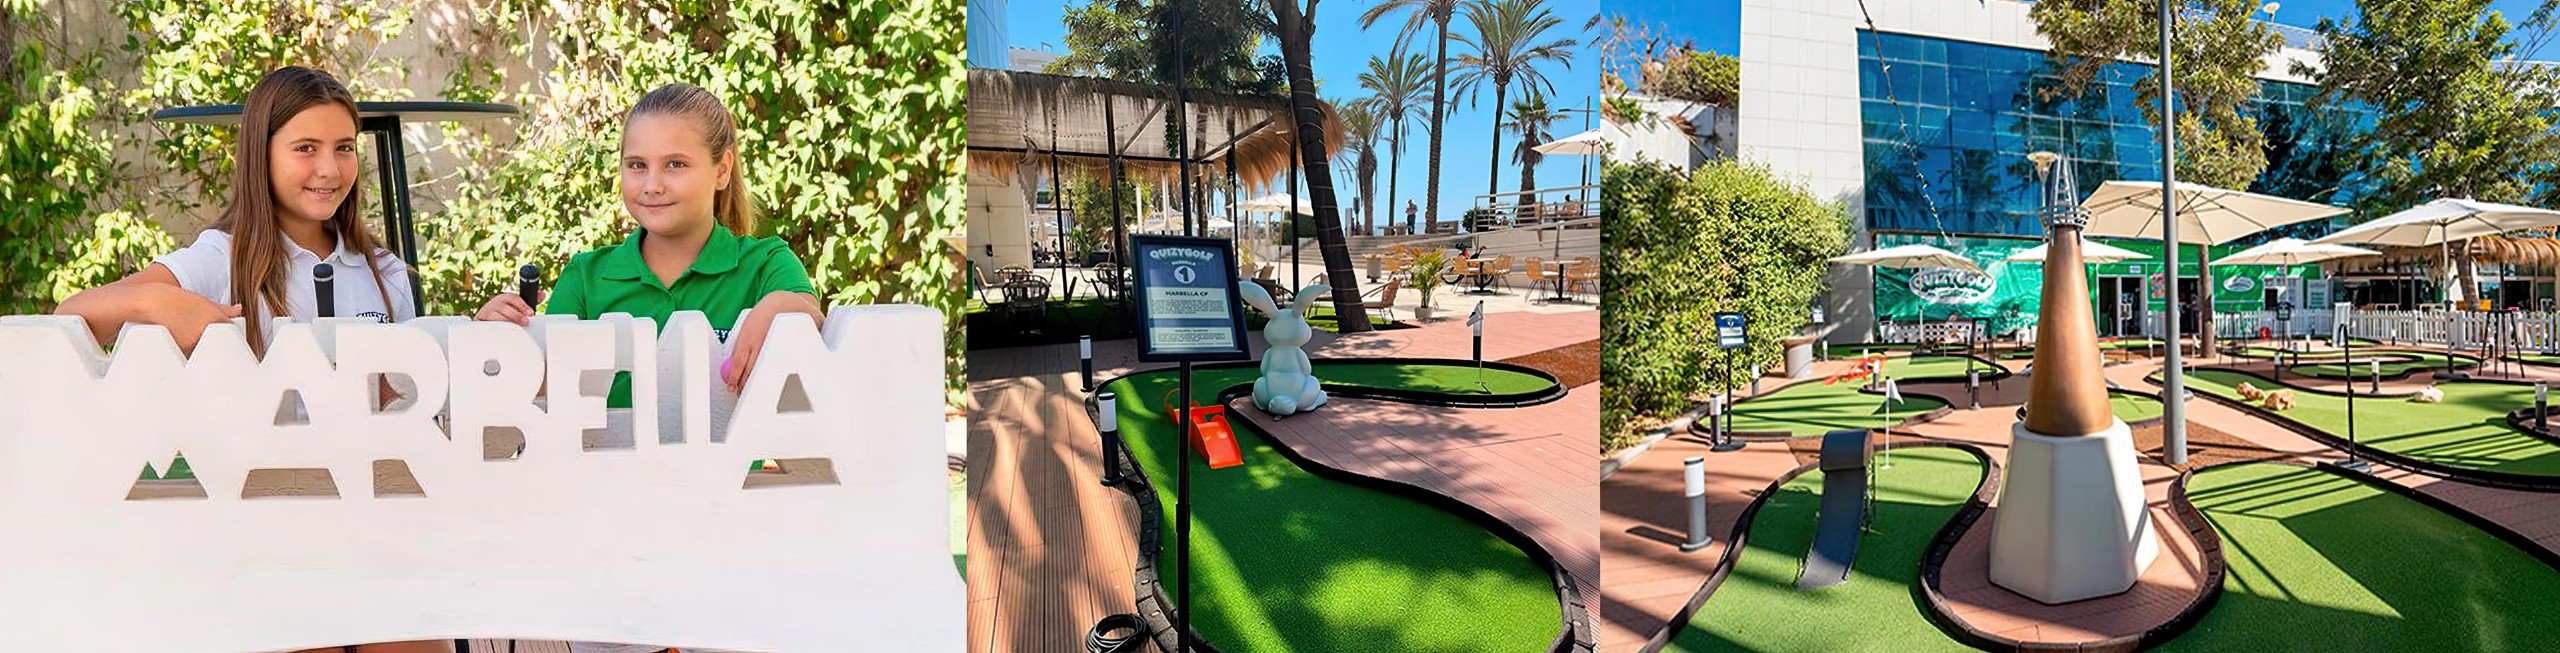 thematication of mini golf parks